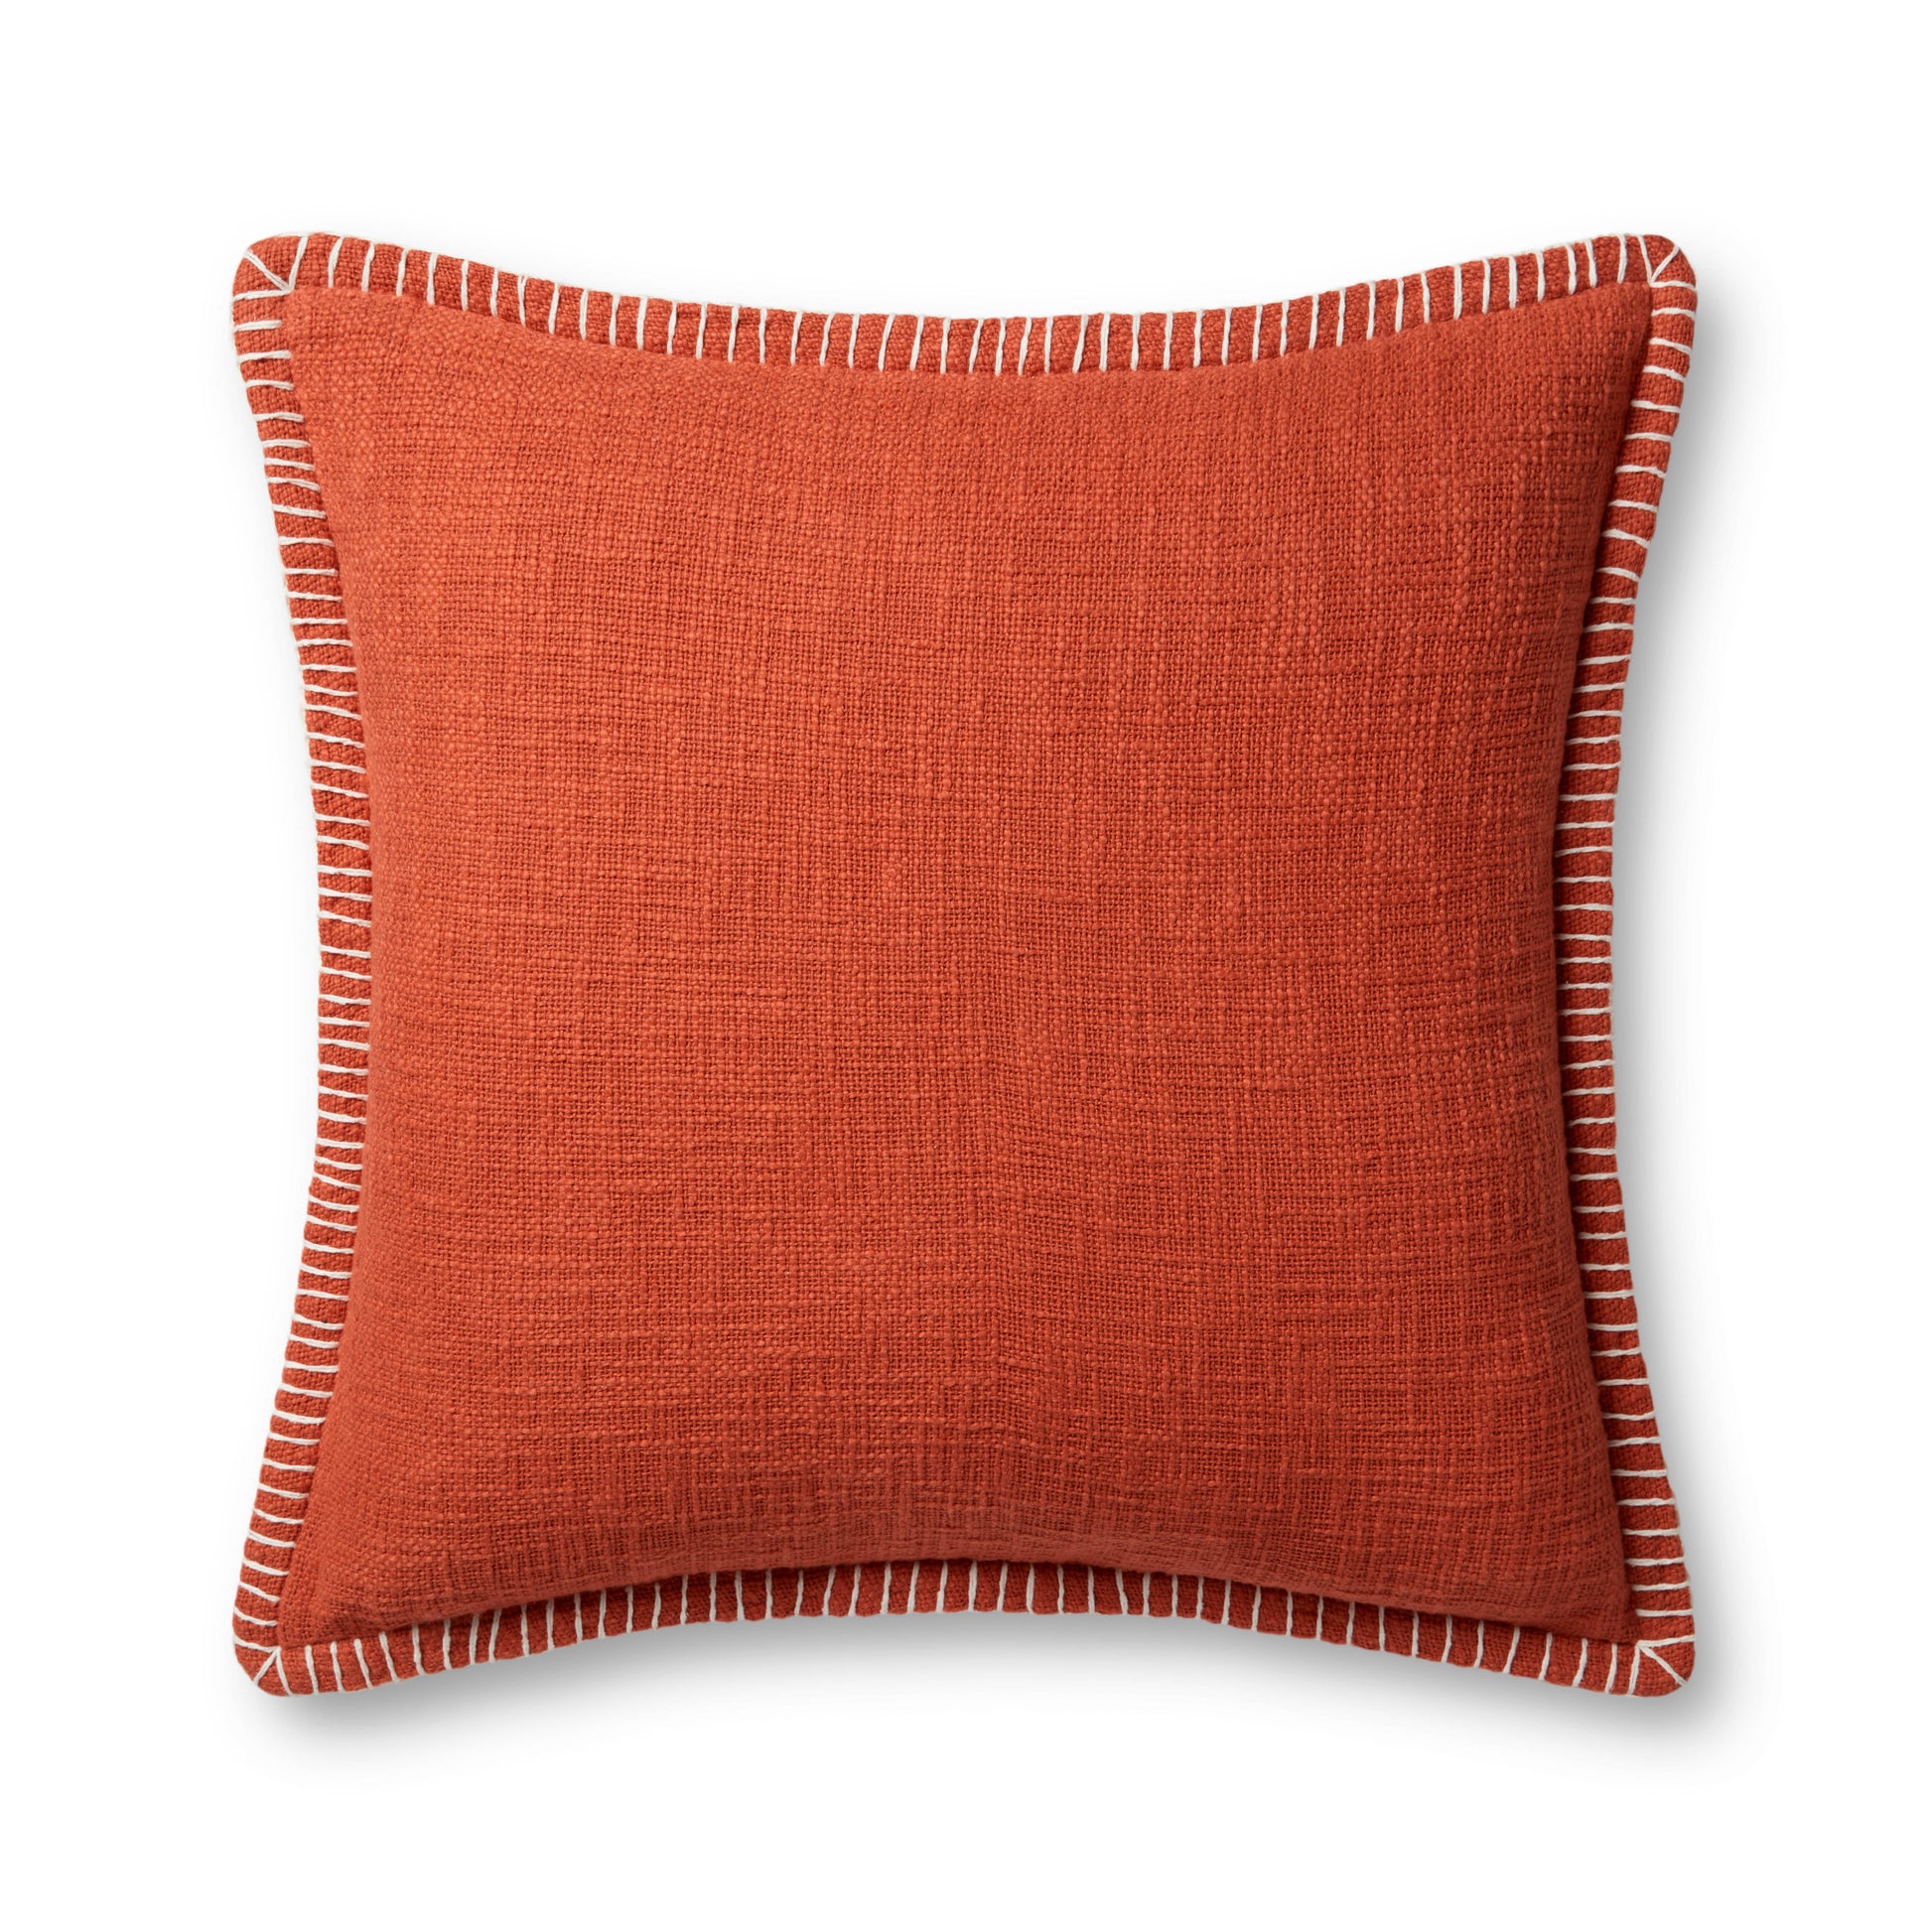 Photo of a pillow;  PLL0109 Orange 22'' x 22'' Cover w/Poly Pillow